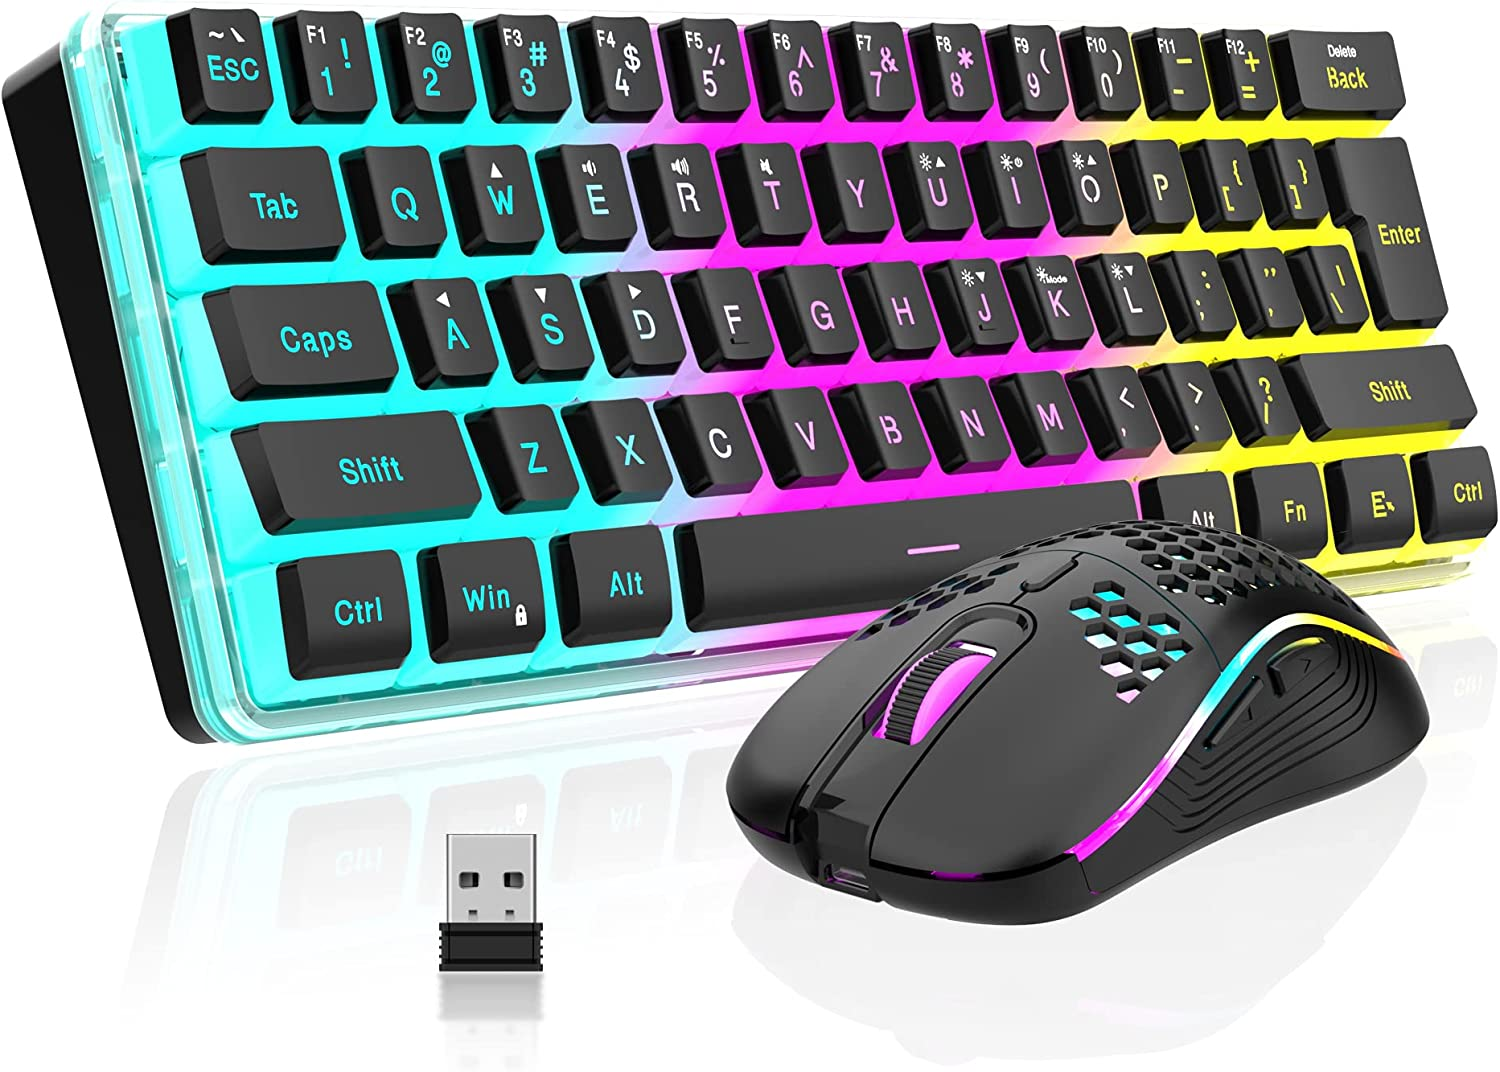 A matching keyboard and mouse could help to make a gaming setup cute and unique.